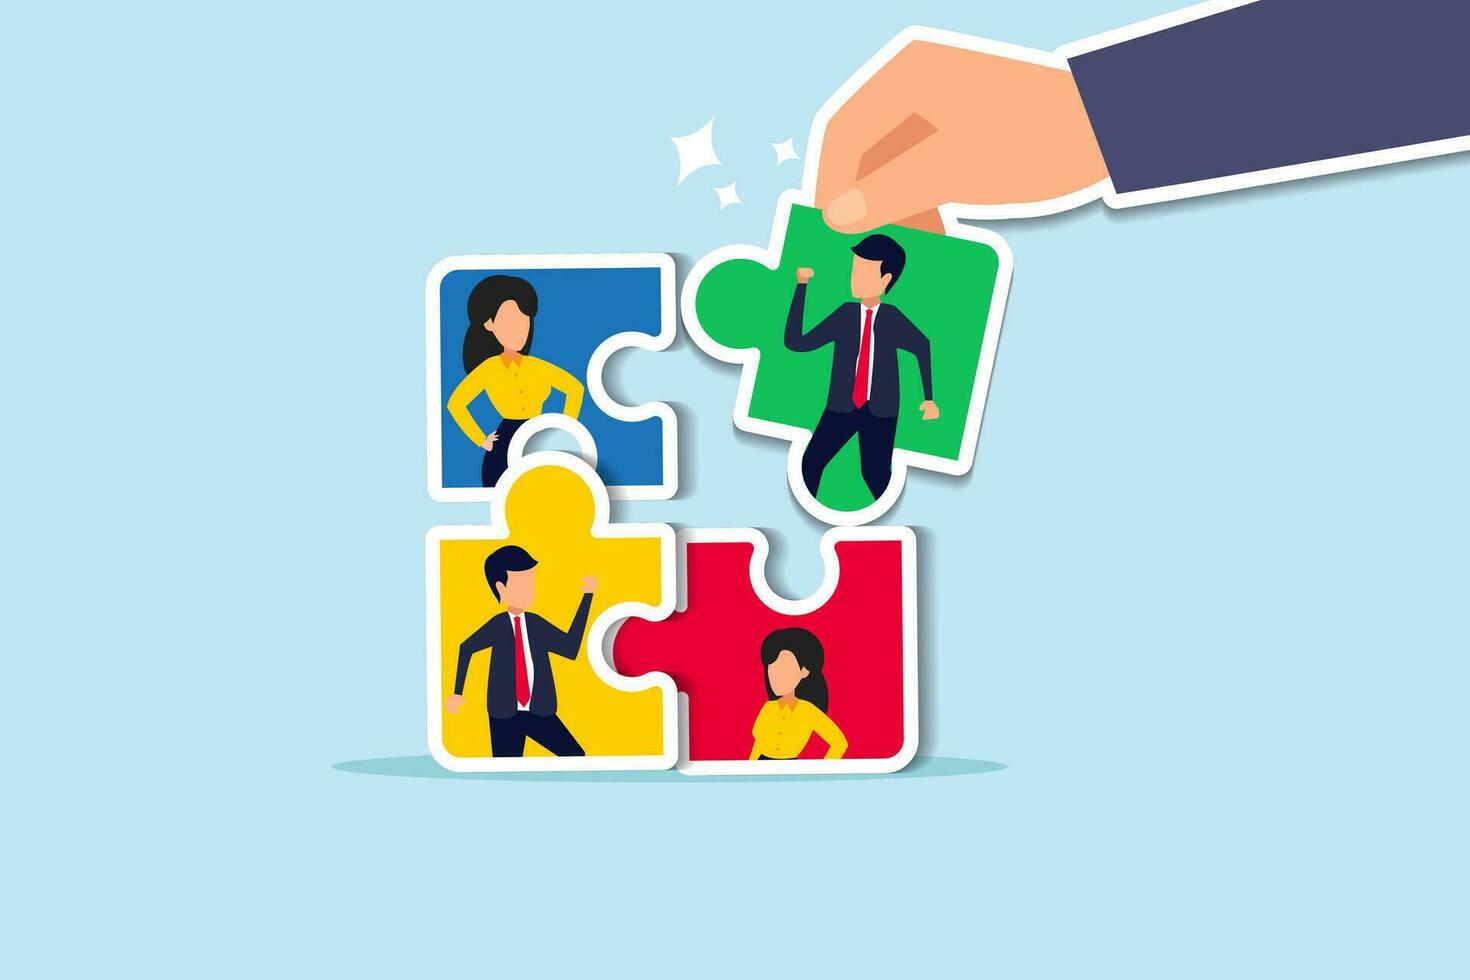 New joiner to fill in team and solve problem, teamwork to get solution, put right man in the right job to fit job description concept, businessman hand HR put new joiner to connect jigsaw puzzle. vector